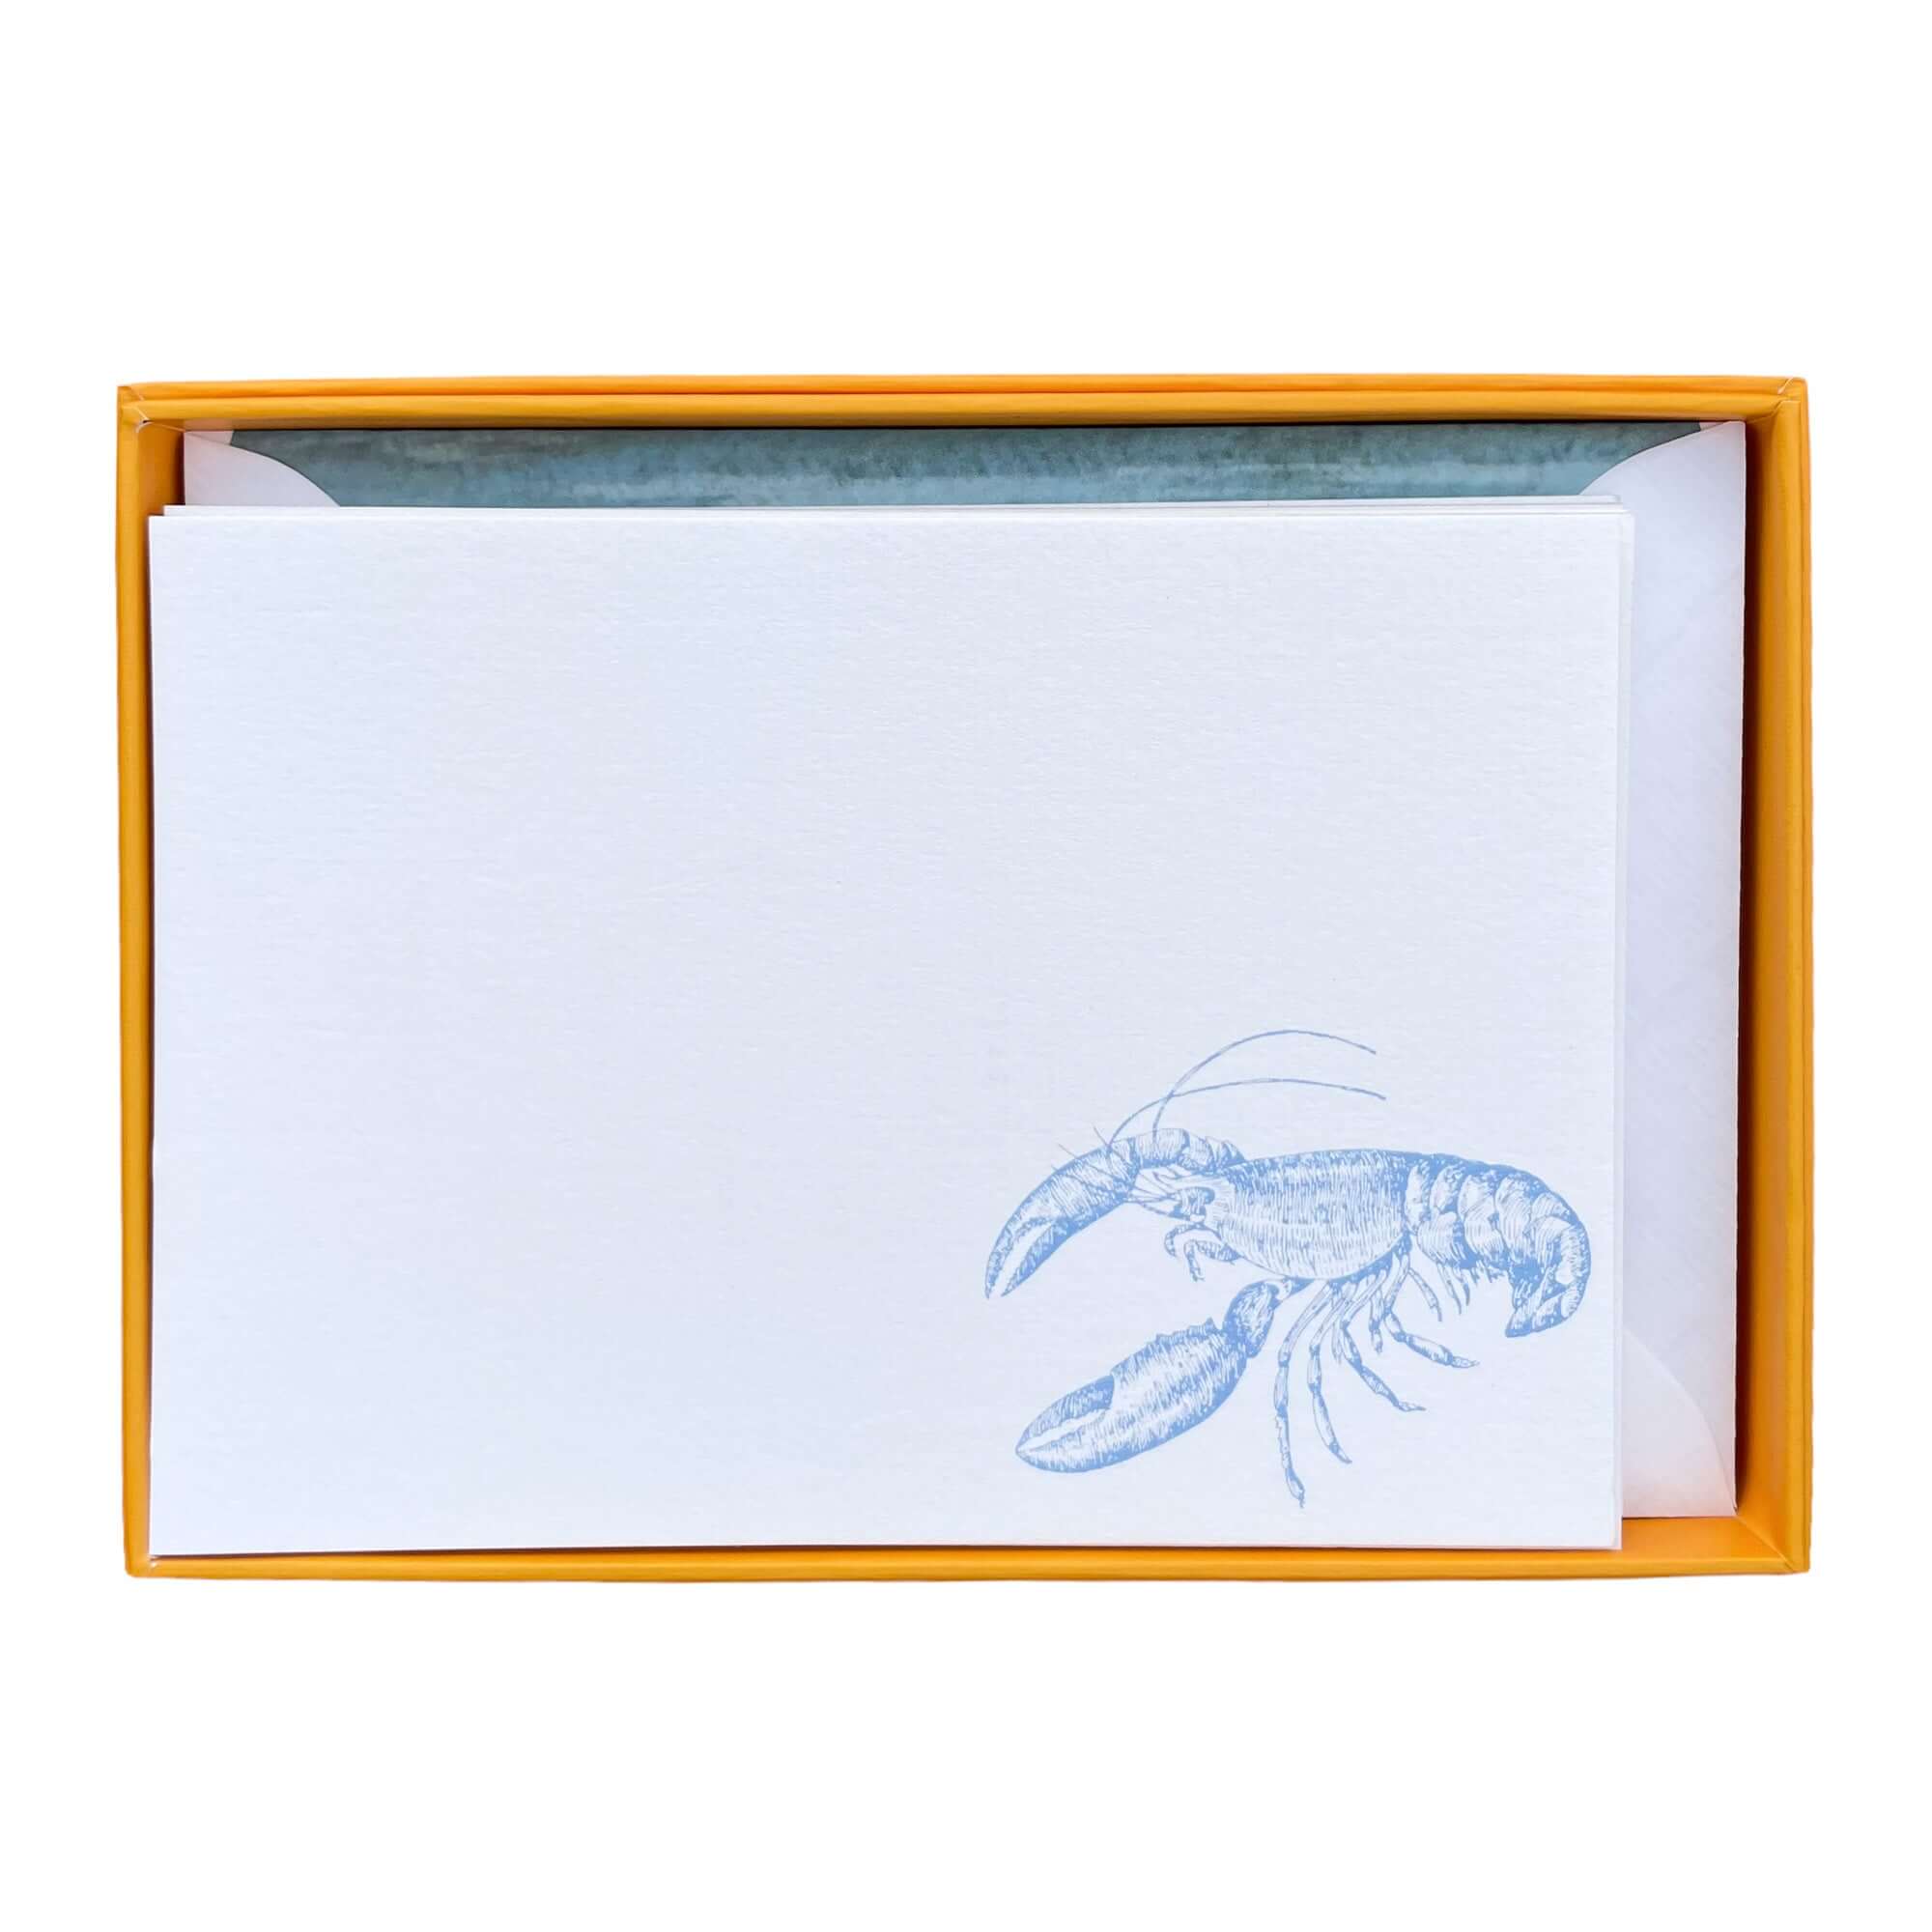 Kraken and Pinch Notecard Set with Lined Envelopes